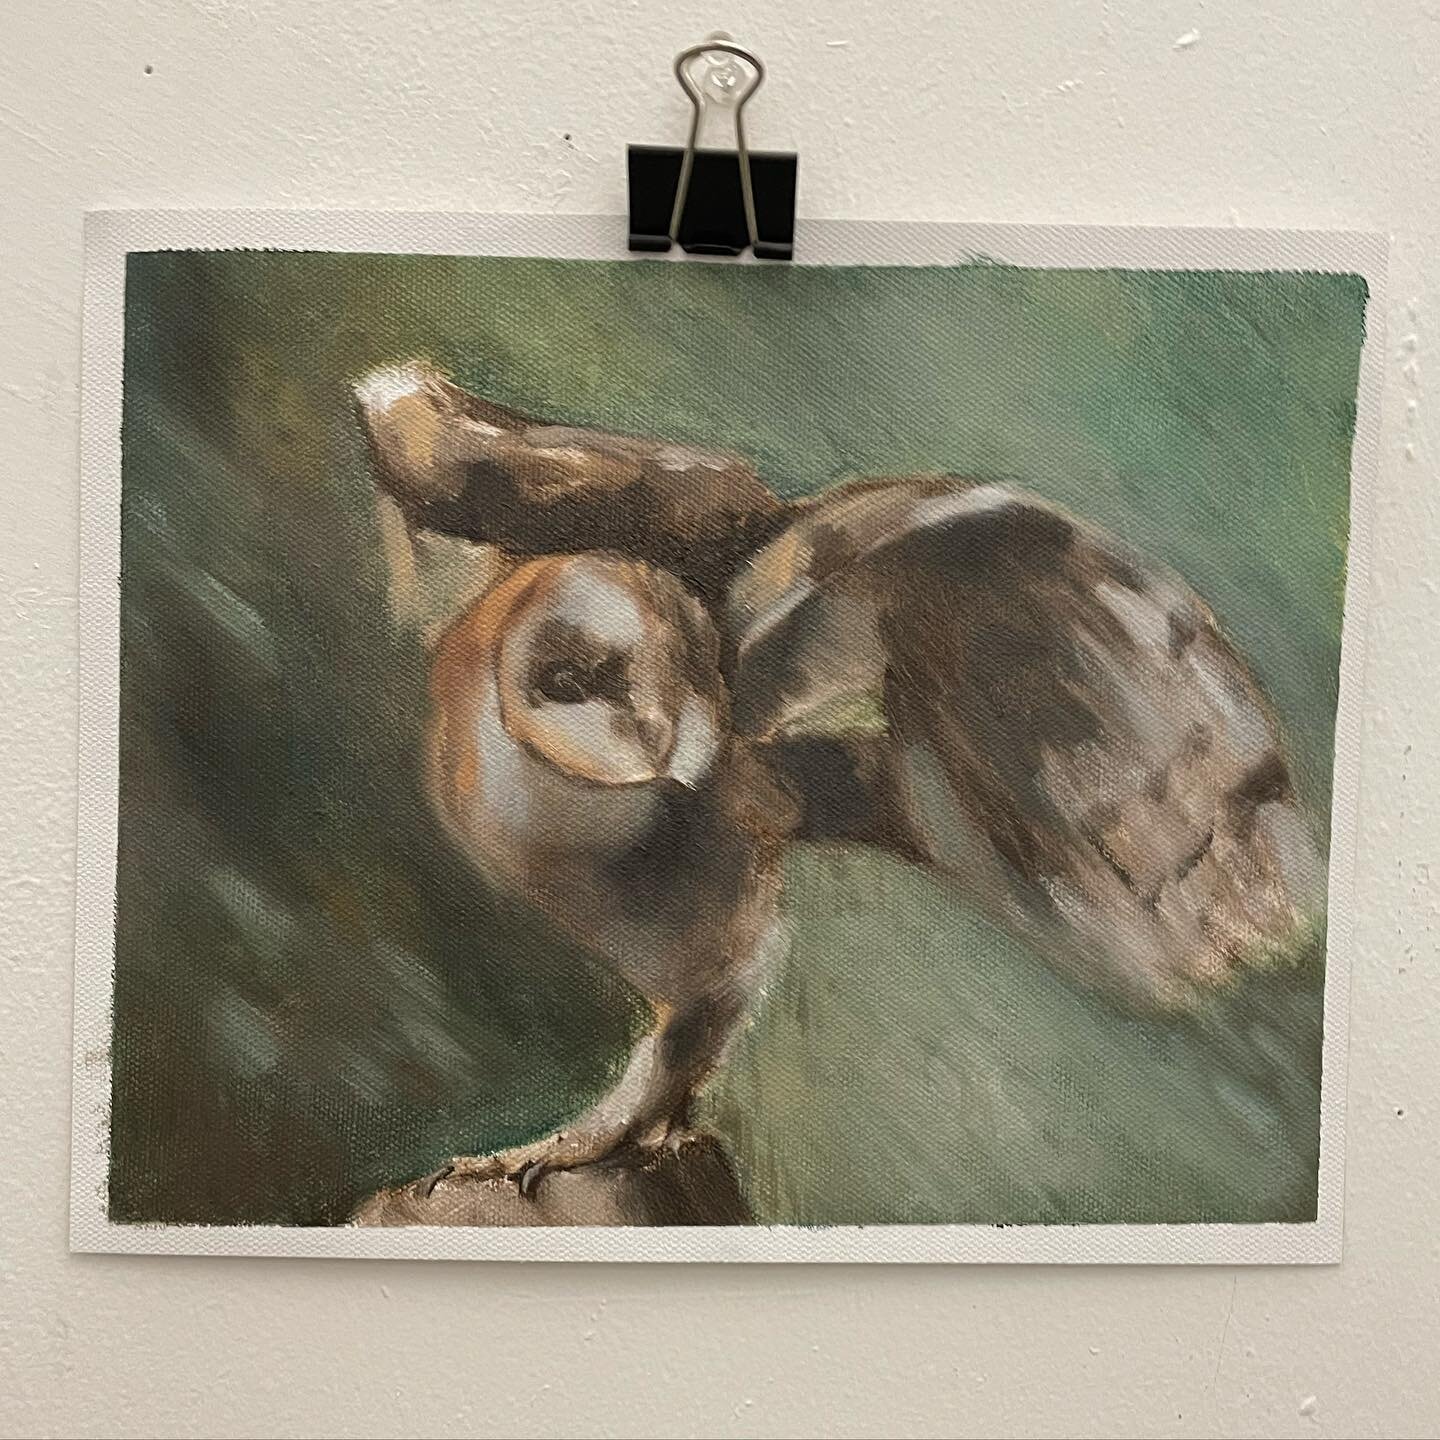 Trying to figure out how to paint owls for an upcoming project